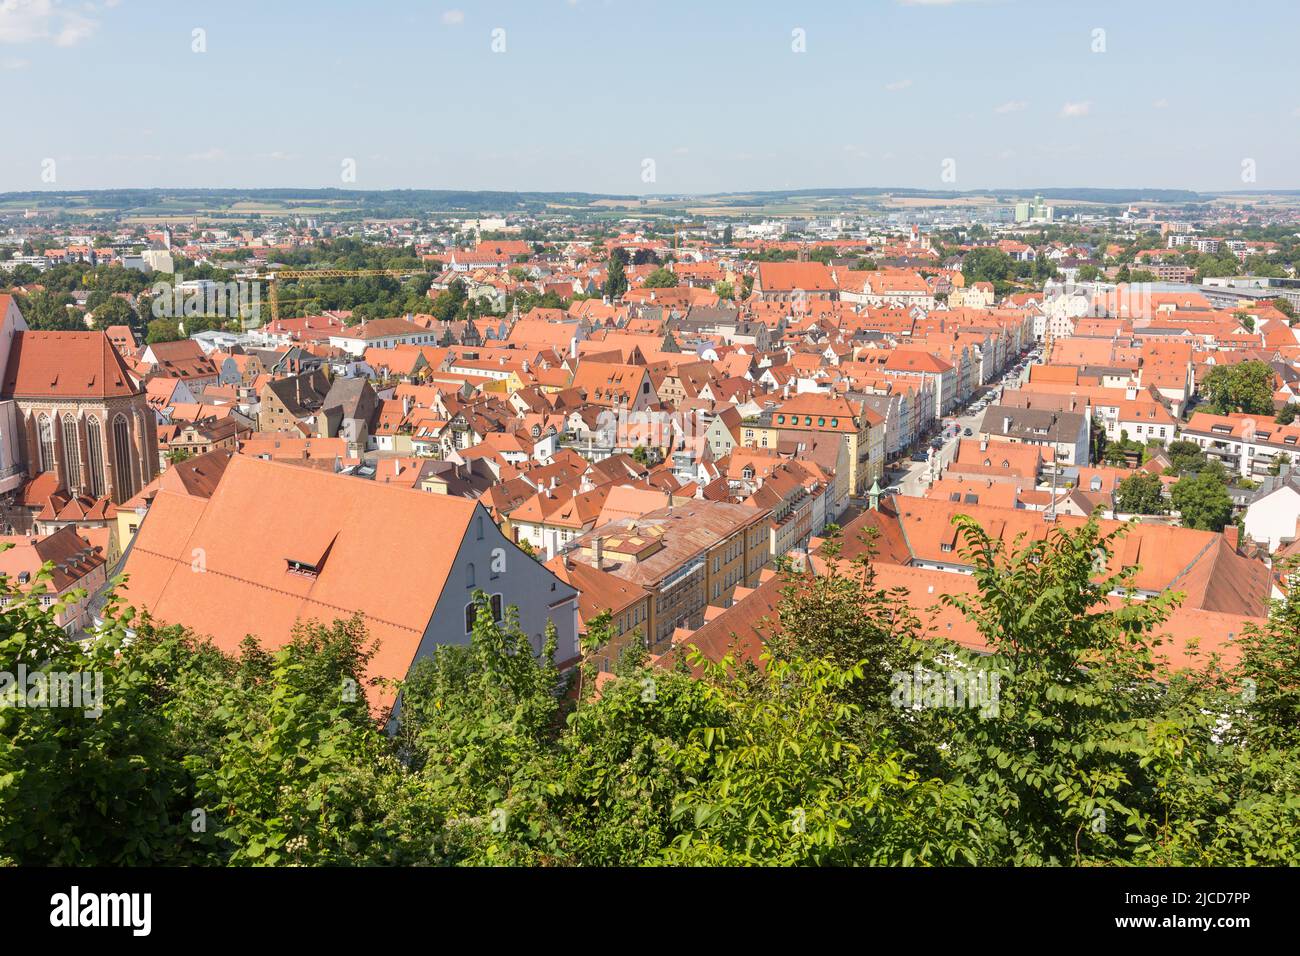 Landshut, Germany - Aug 14, 2021: High angle view on the old town of Landshut. Stock Photo